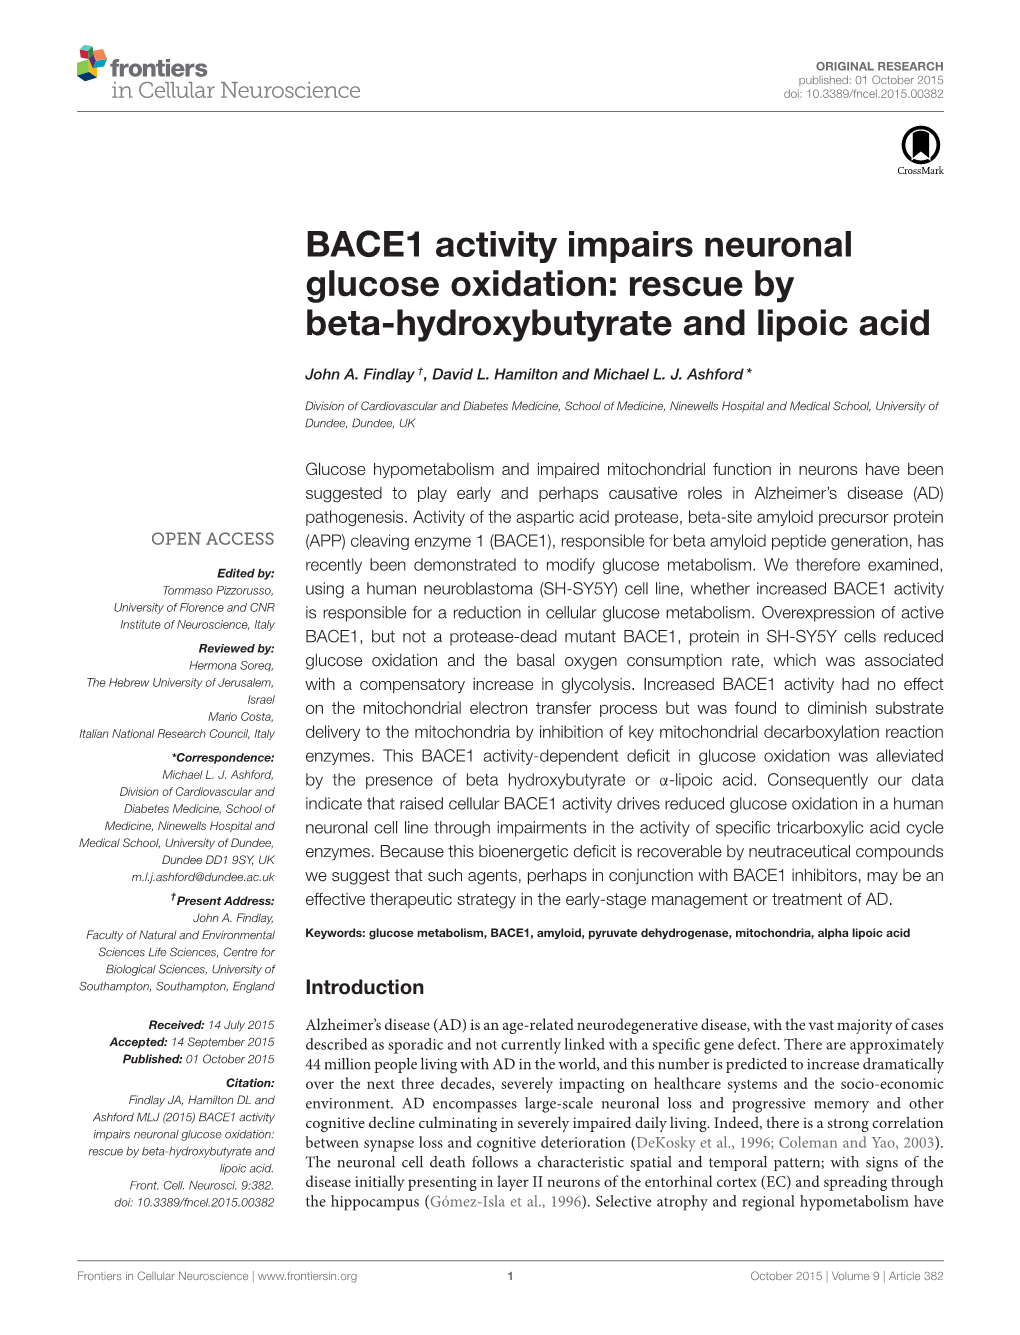 BACE1 Activity Impairs Neuronal Glucose Oxidation: Rescue by Beta-Hydroxybutyrate and Lipoic Acid